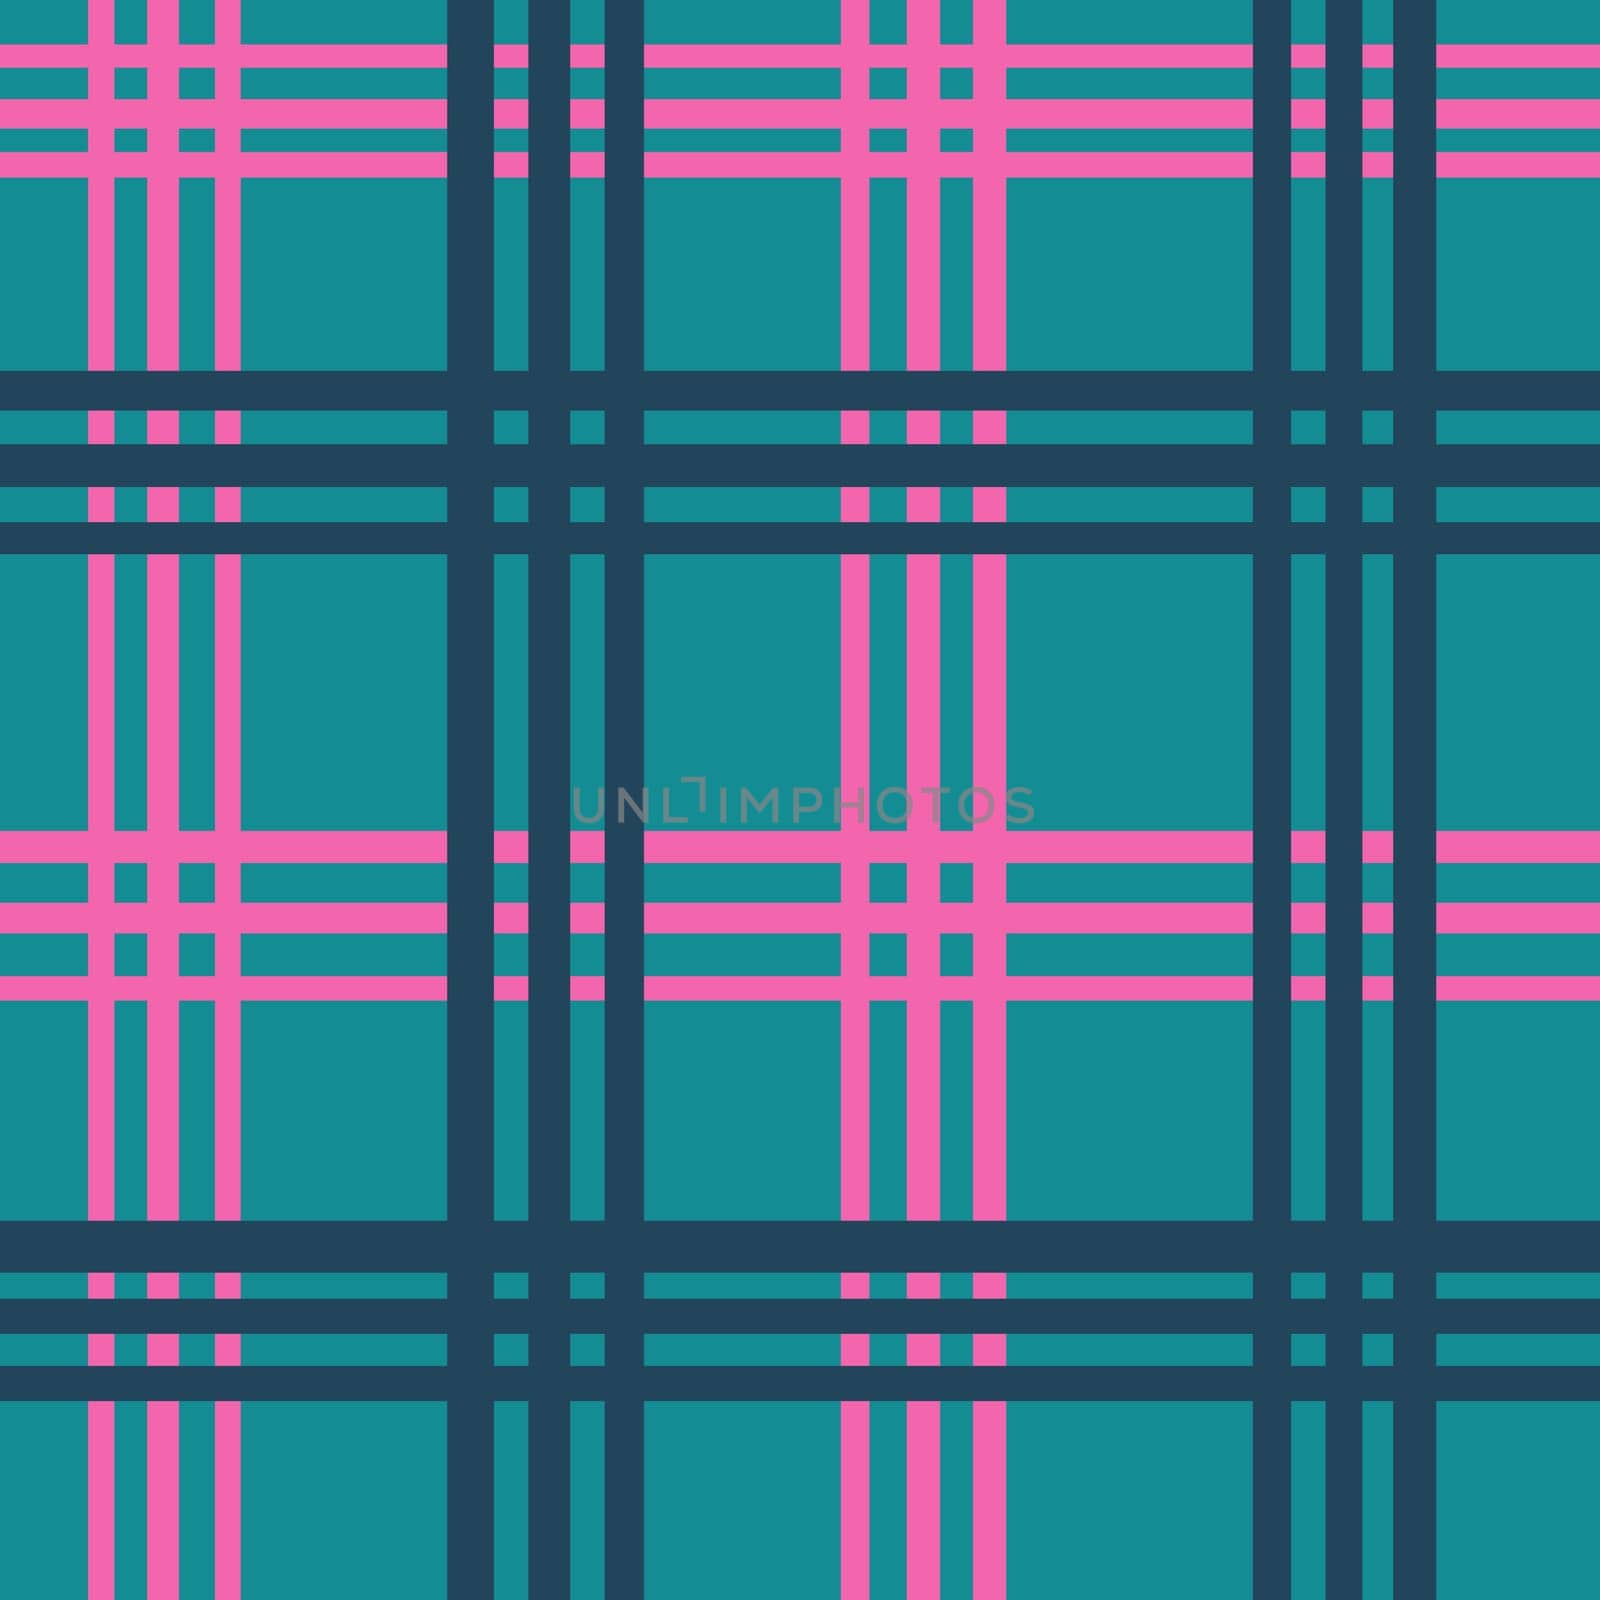 Hand drawn seamless pattern of plaid tartan checkered textile print in teal blue pink navy. Checks squares lines in abstract geometric modern colorful design. For wallpaper men textile boy gingham decor